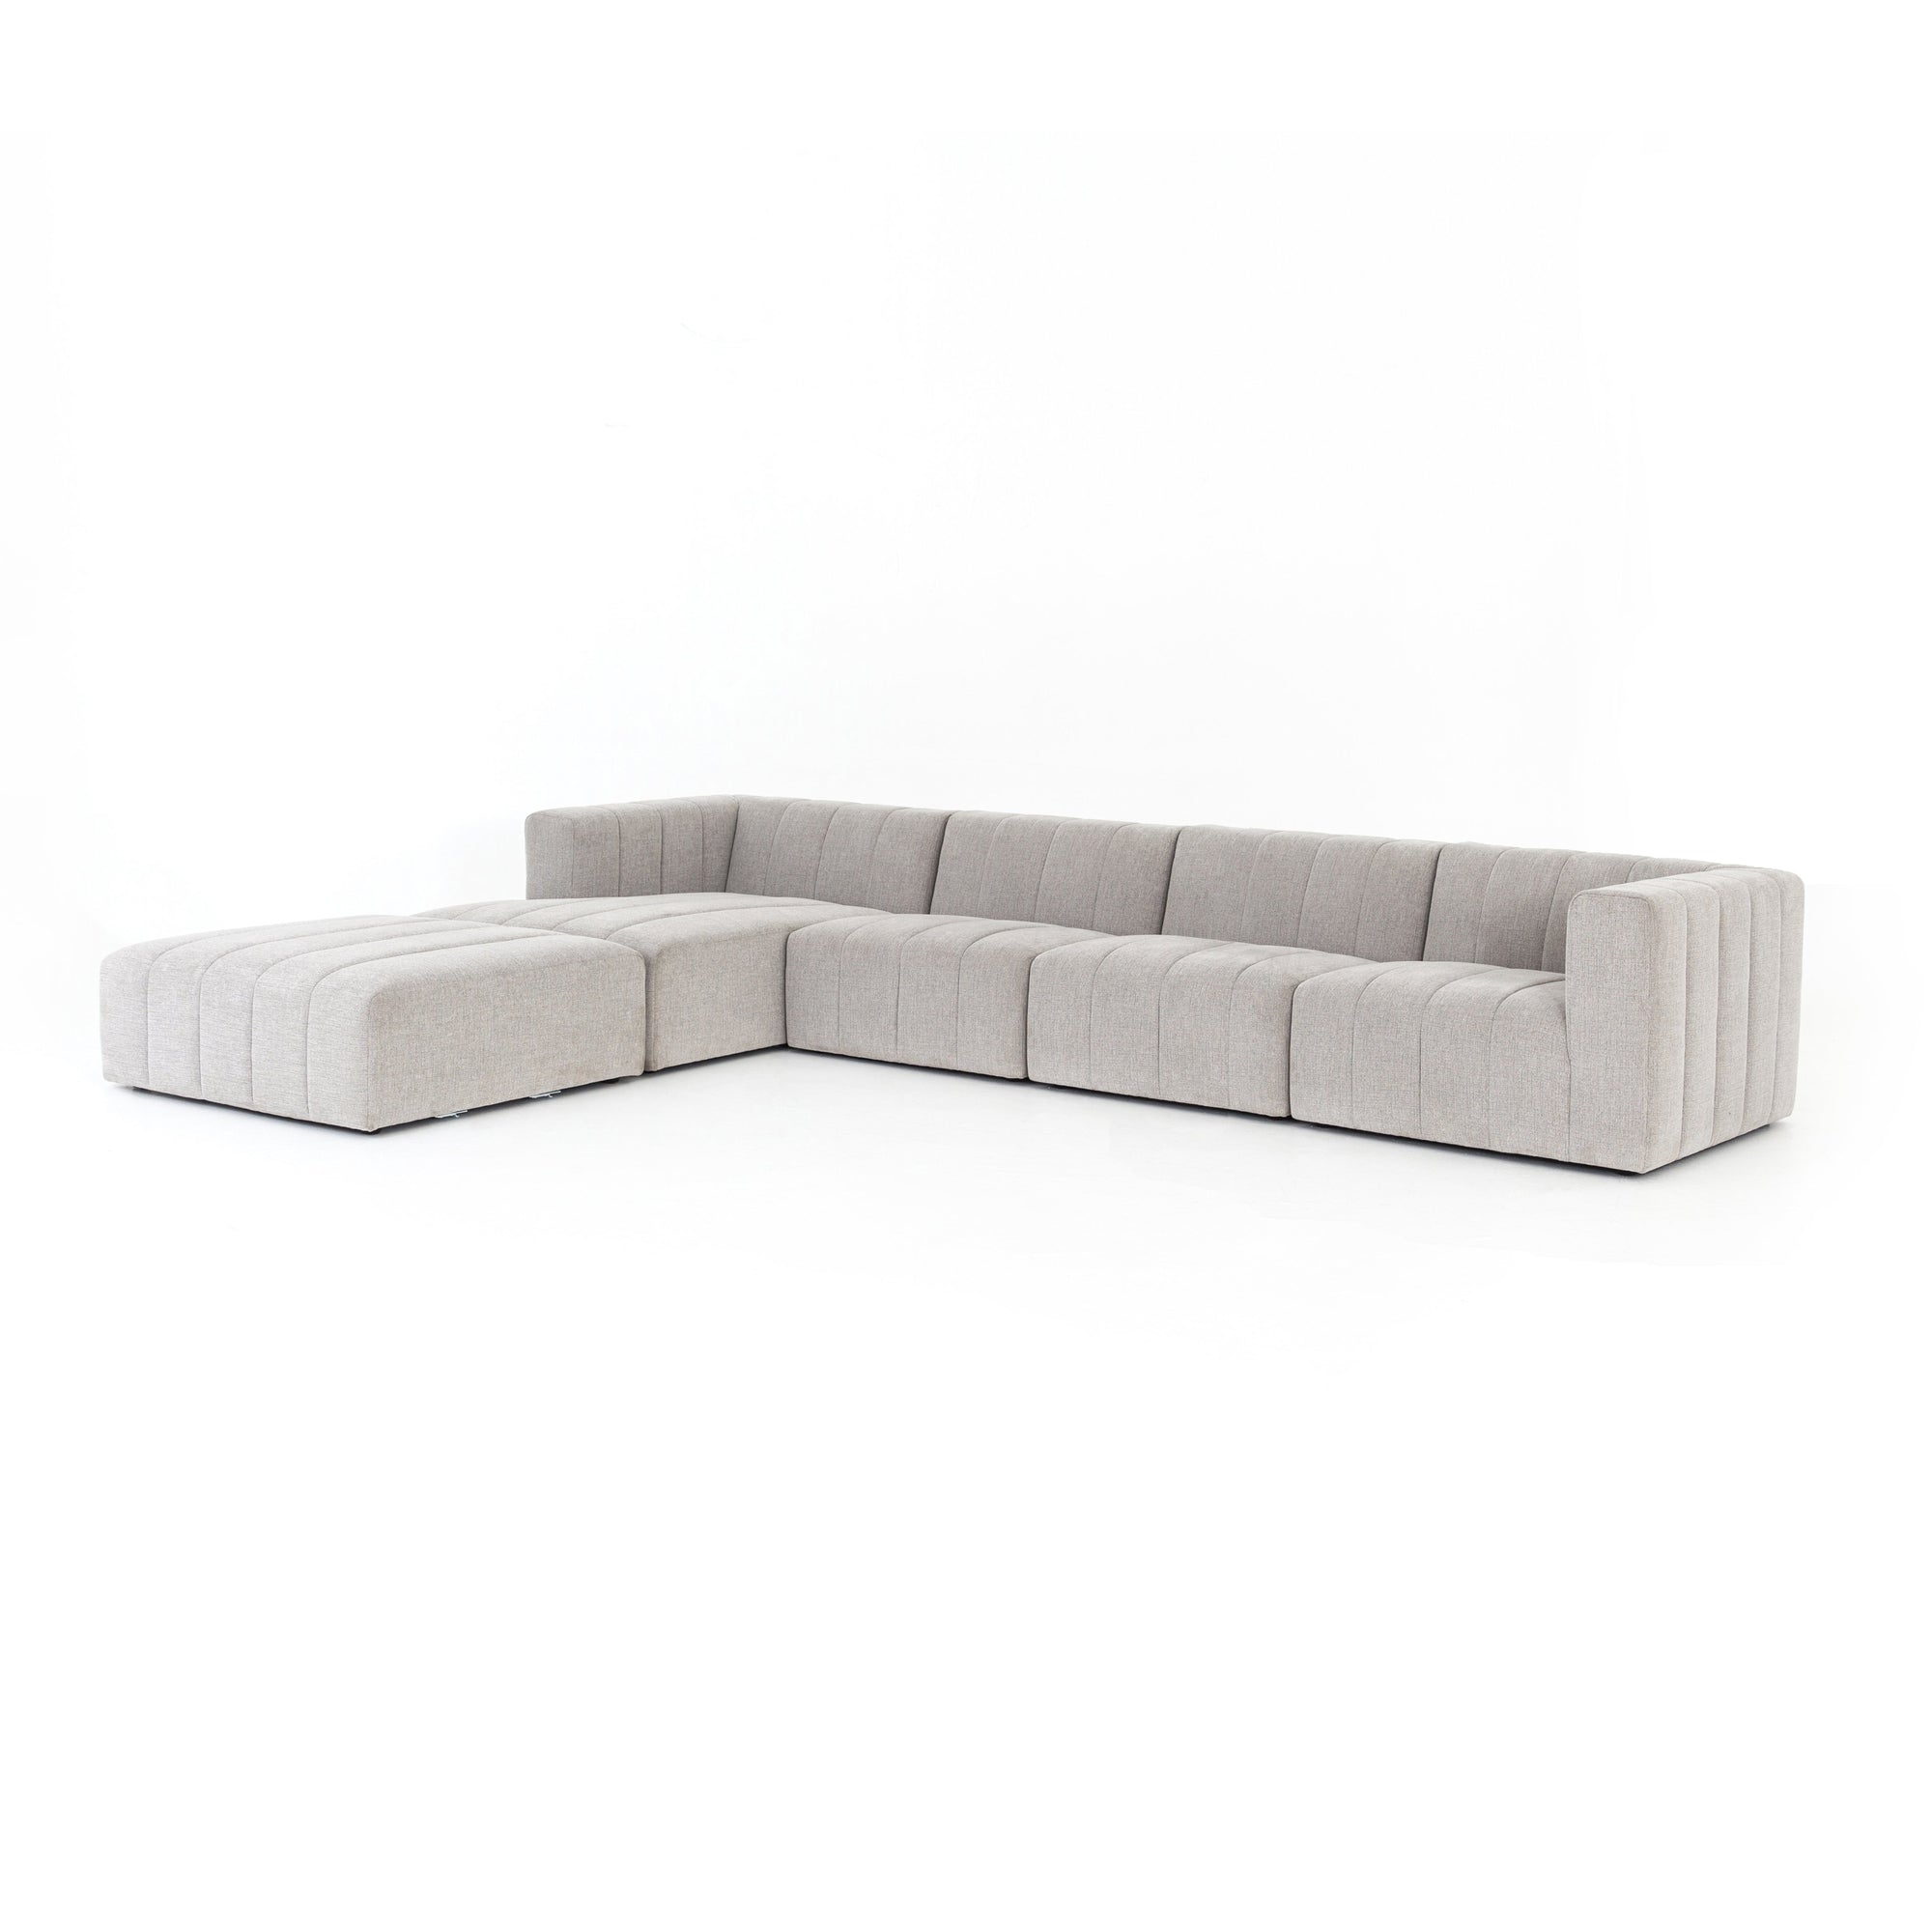 Langham Channeled 4 - Pc Laf Sectional W/